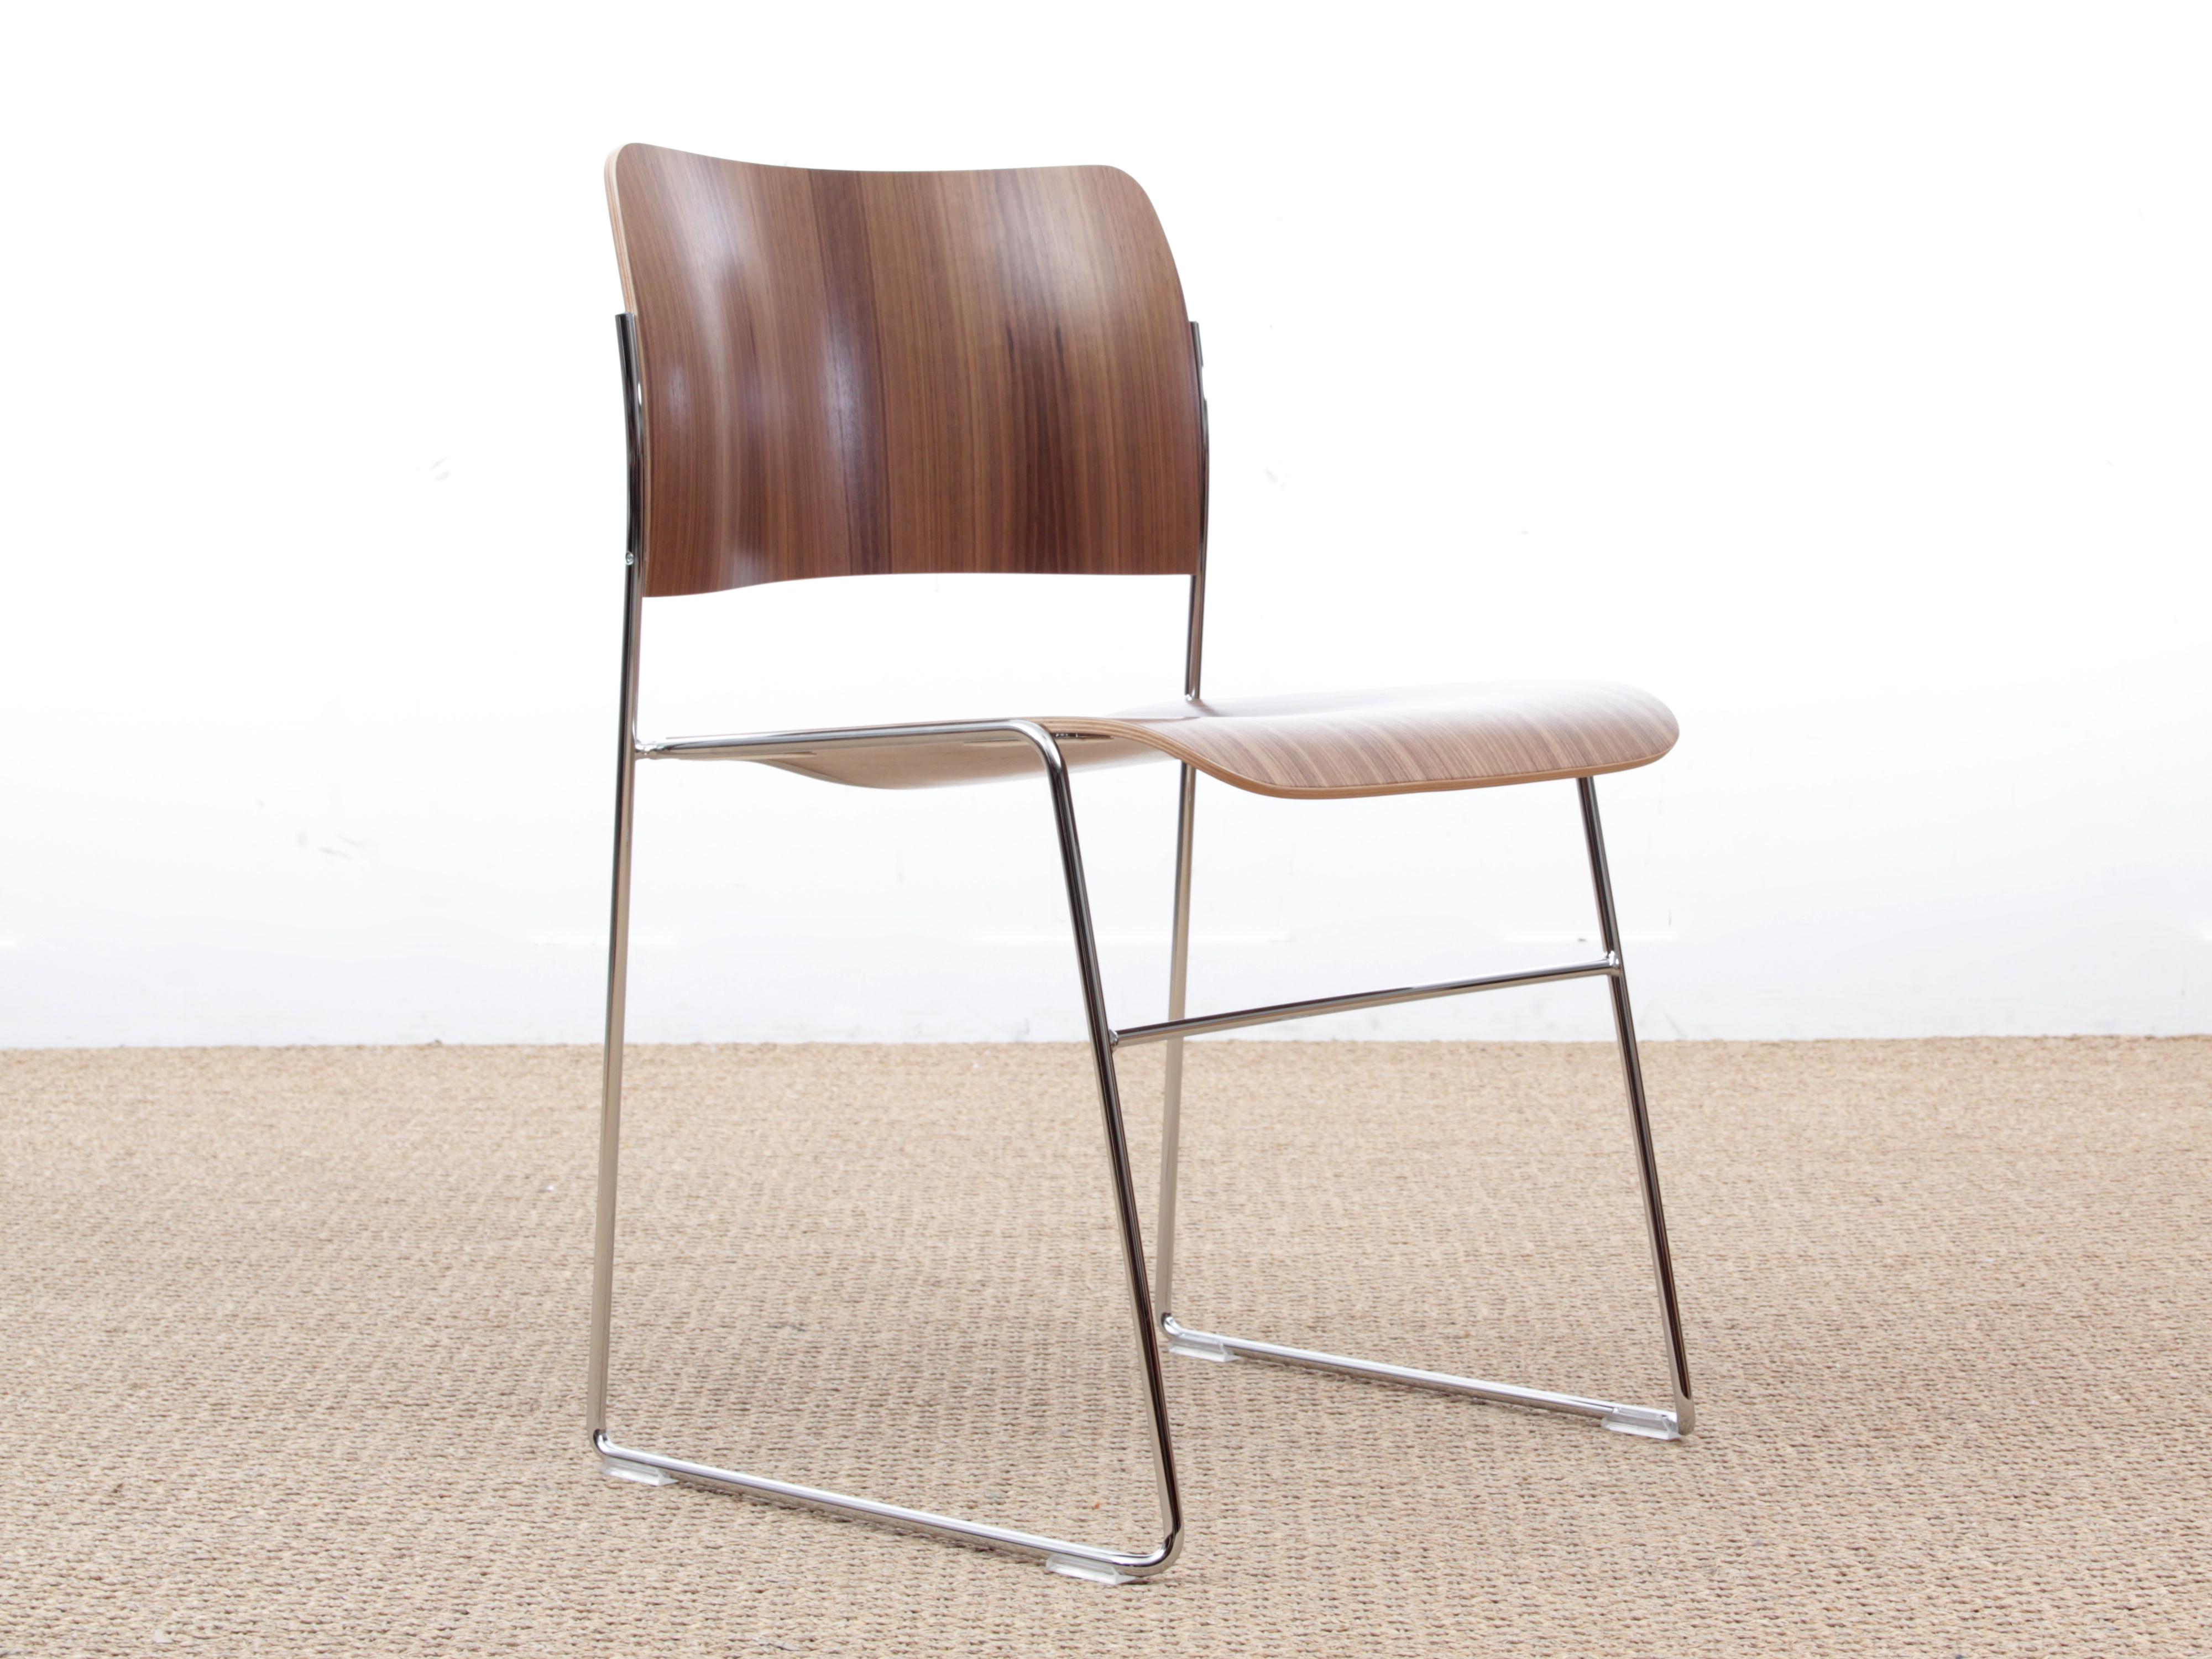 40/4 chair by David Rowland, new edition. Its elegant lines, excellent ergonomics, and unsurpassed ability to create space without taking up space continues to attract architects and designers.
An indisputable icon of multifunctional design, the